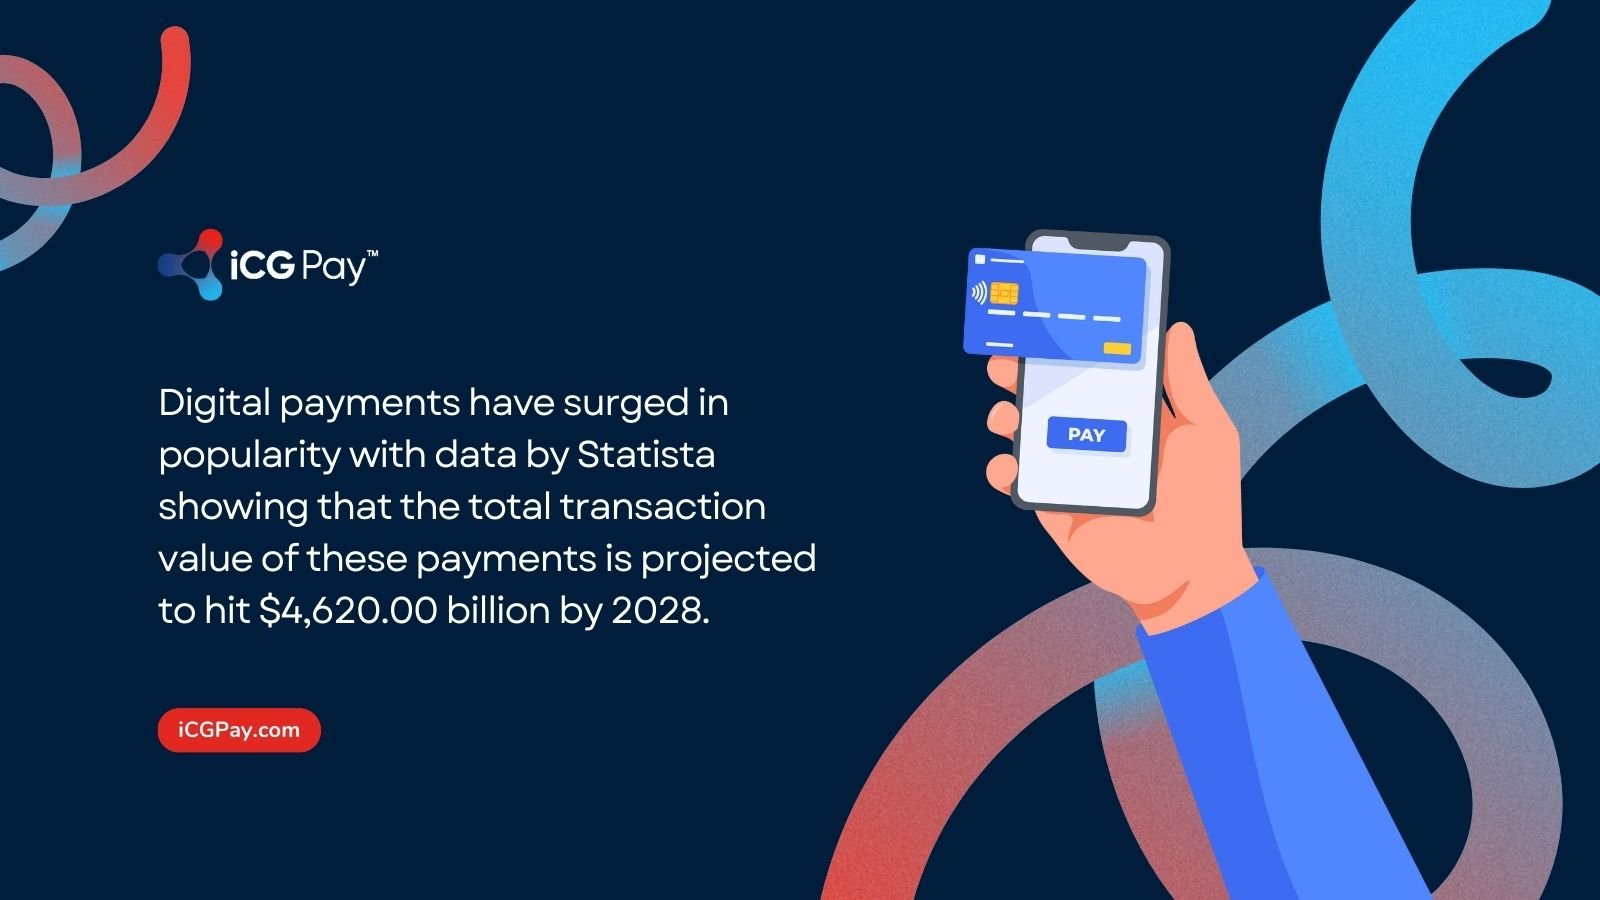 The popularity of digital payments